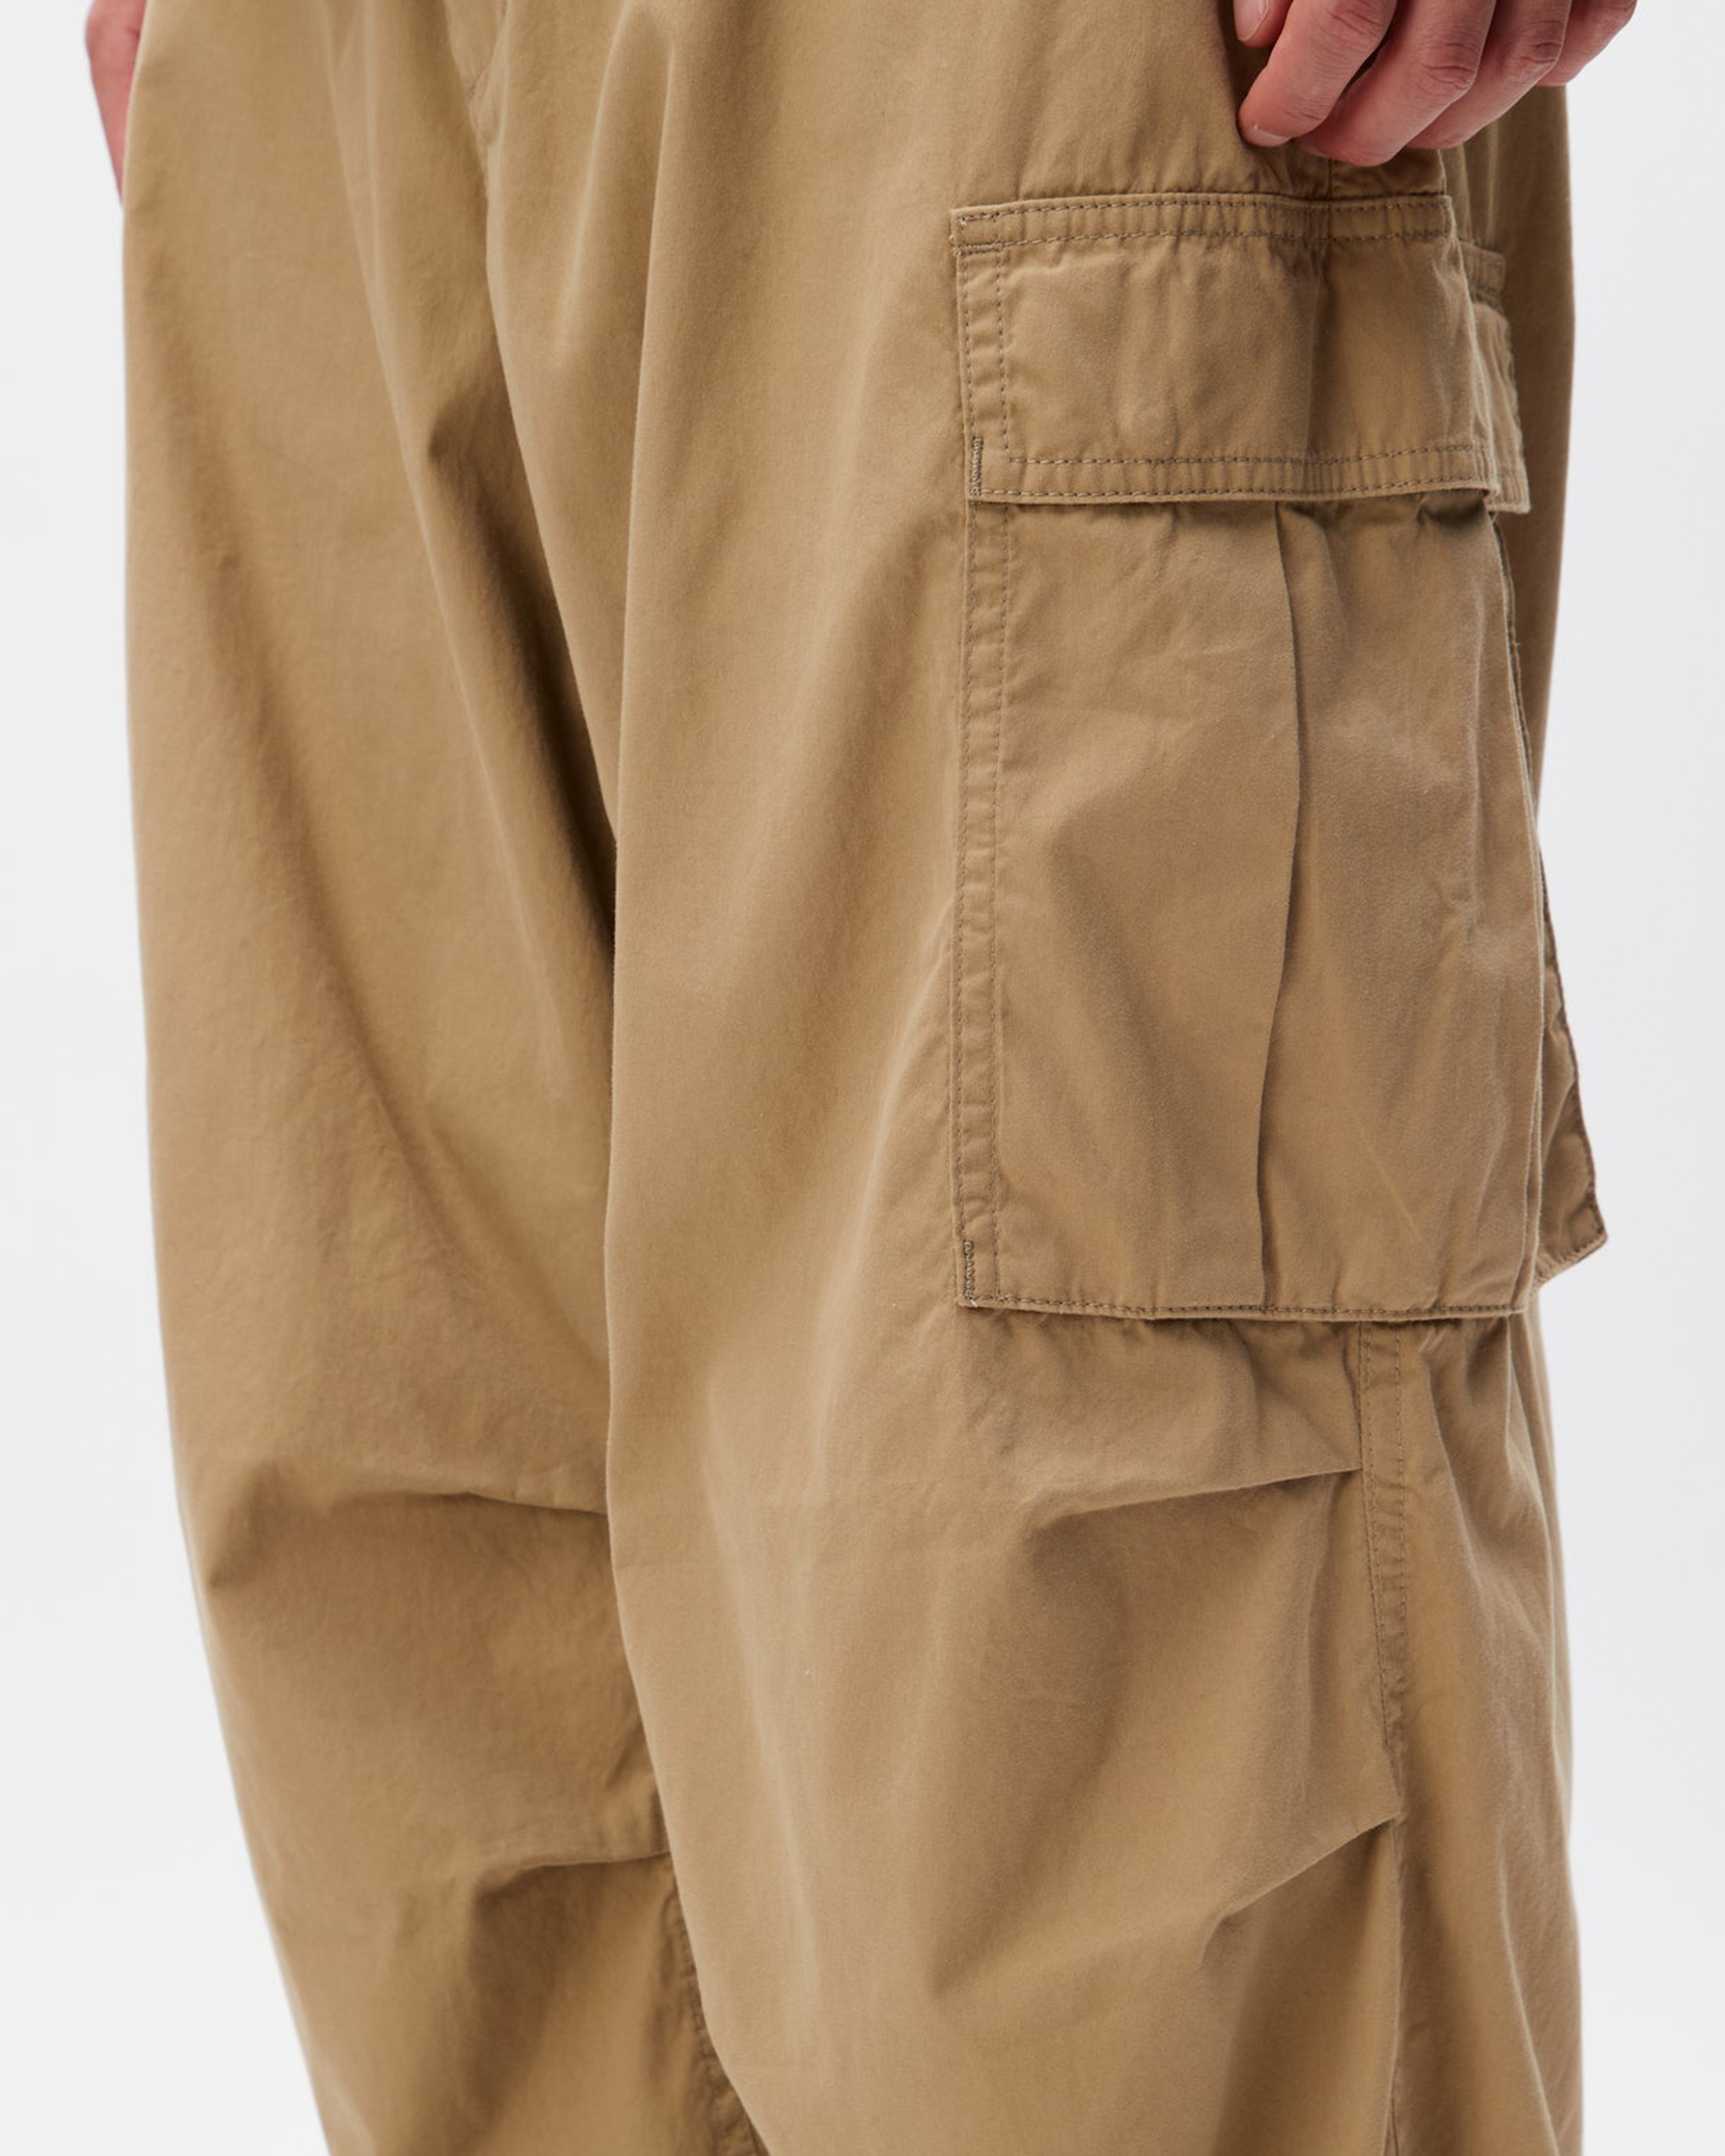 Woven Wide Cargo Pants - Olive Drab